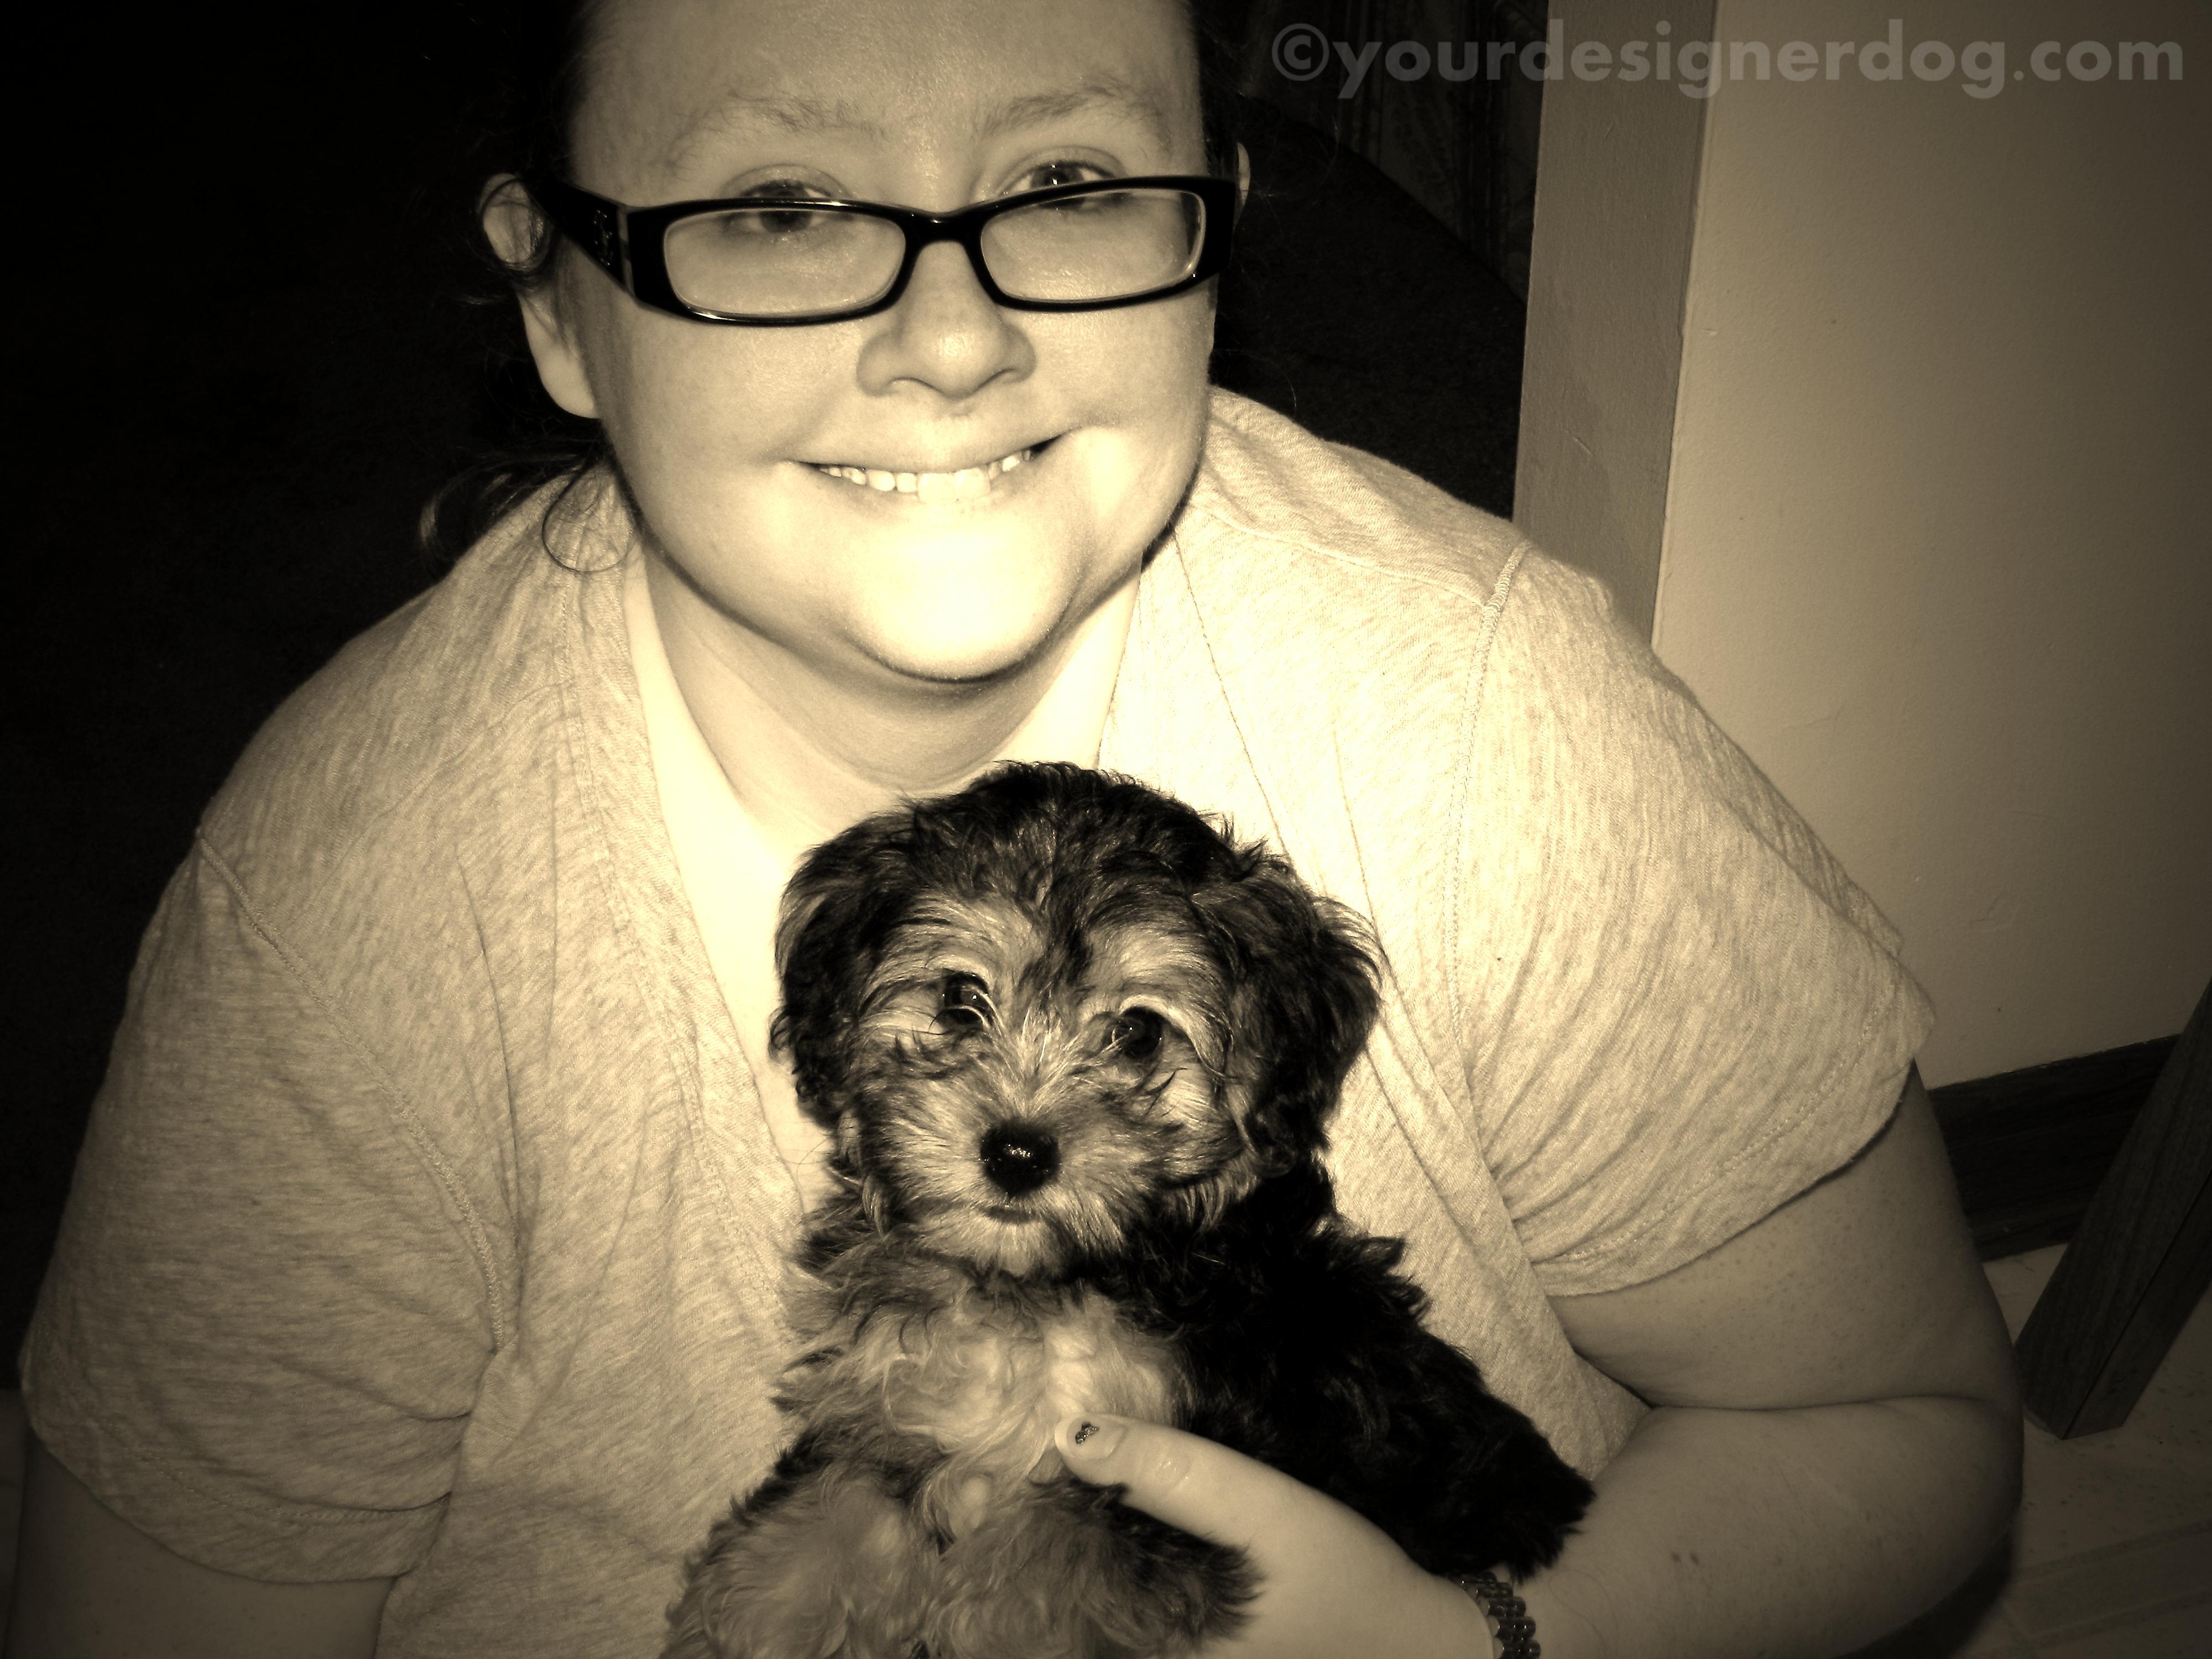 dogs, designer dogs, yorkipoo, yorkie poo, blogiversary, sepia photography, puppy